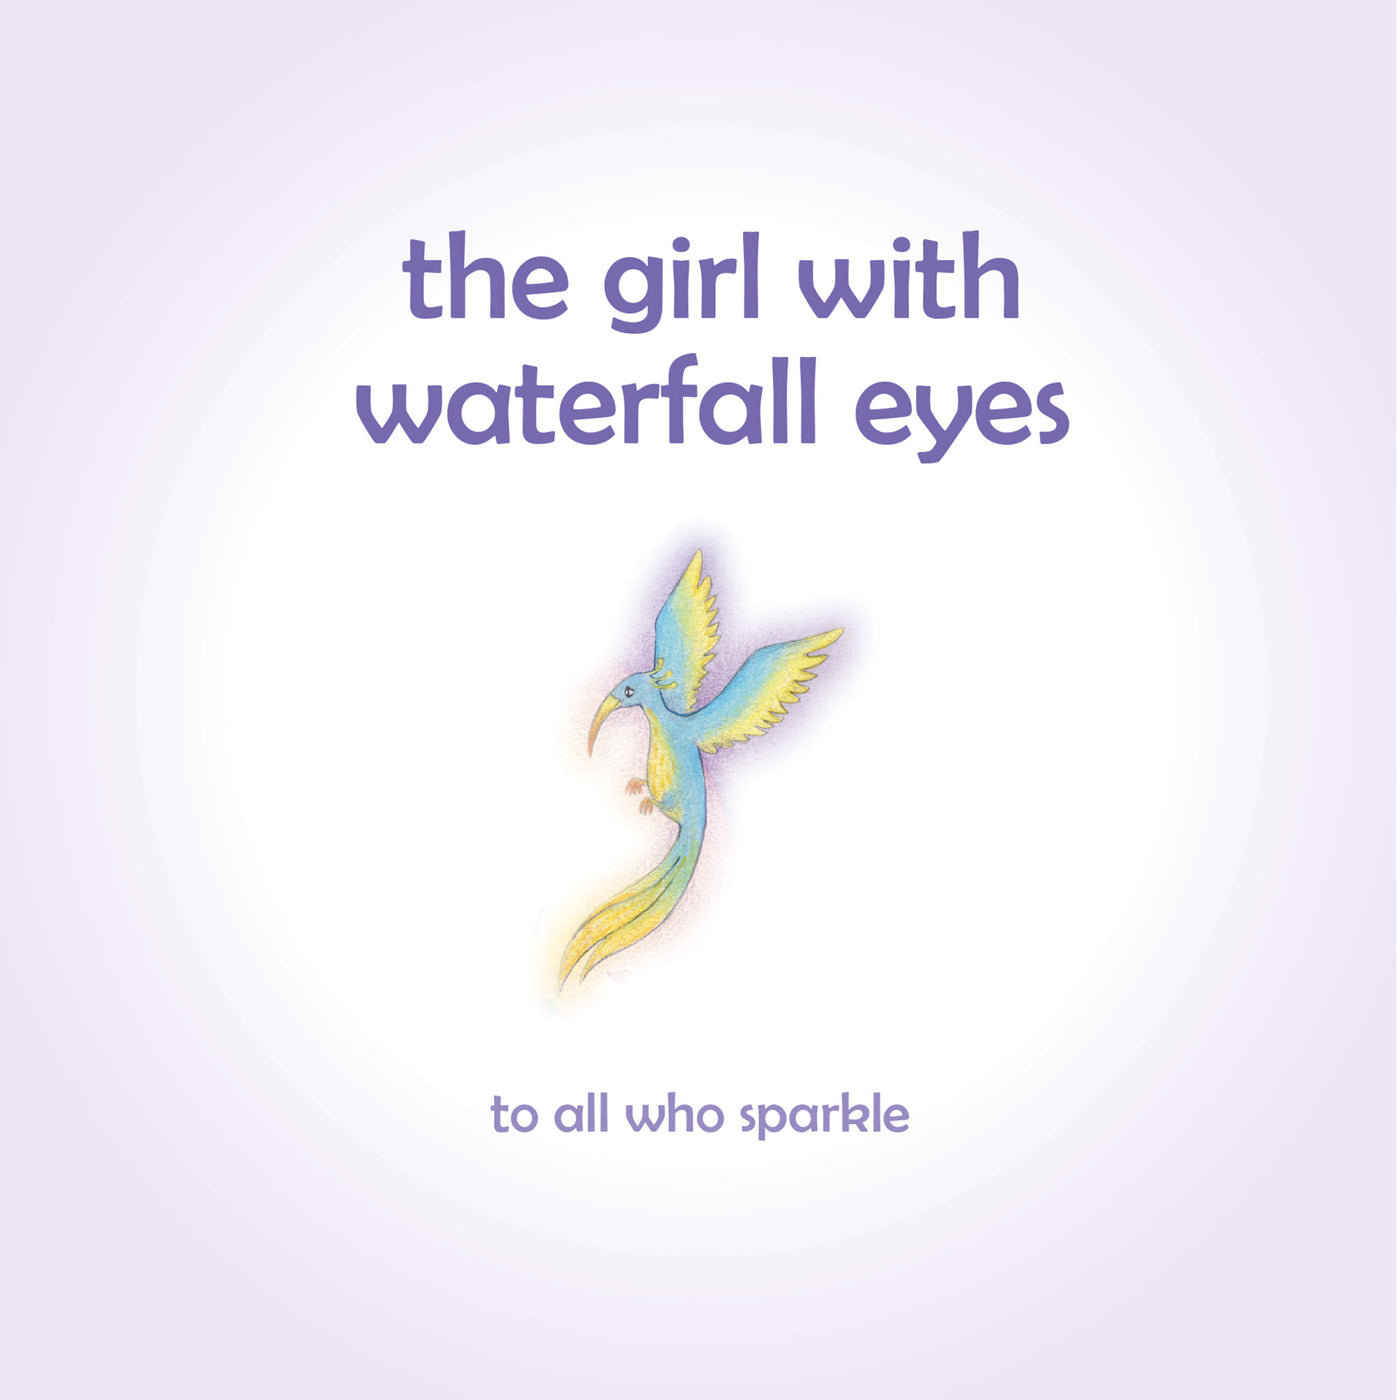 The Girl with Waterfall Eyes: Helping children to see beauty in themselves and others